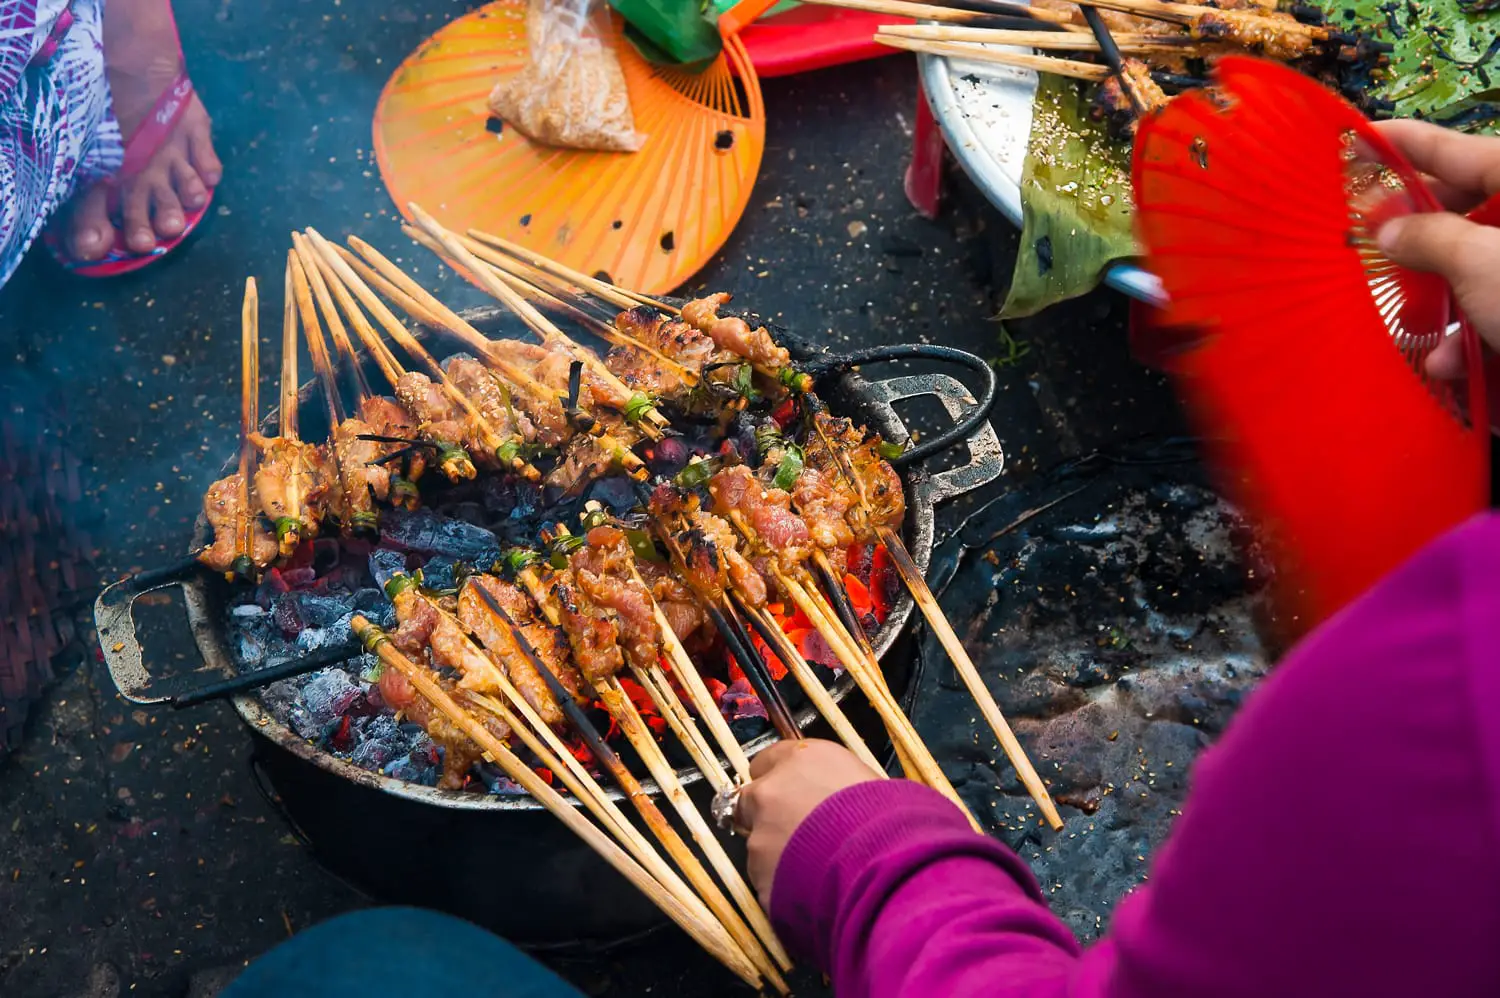 Hawker prepare the skewered grilled meats at street of Hoi An, a local delicacy of Vietnam